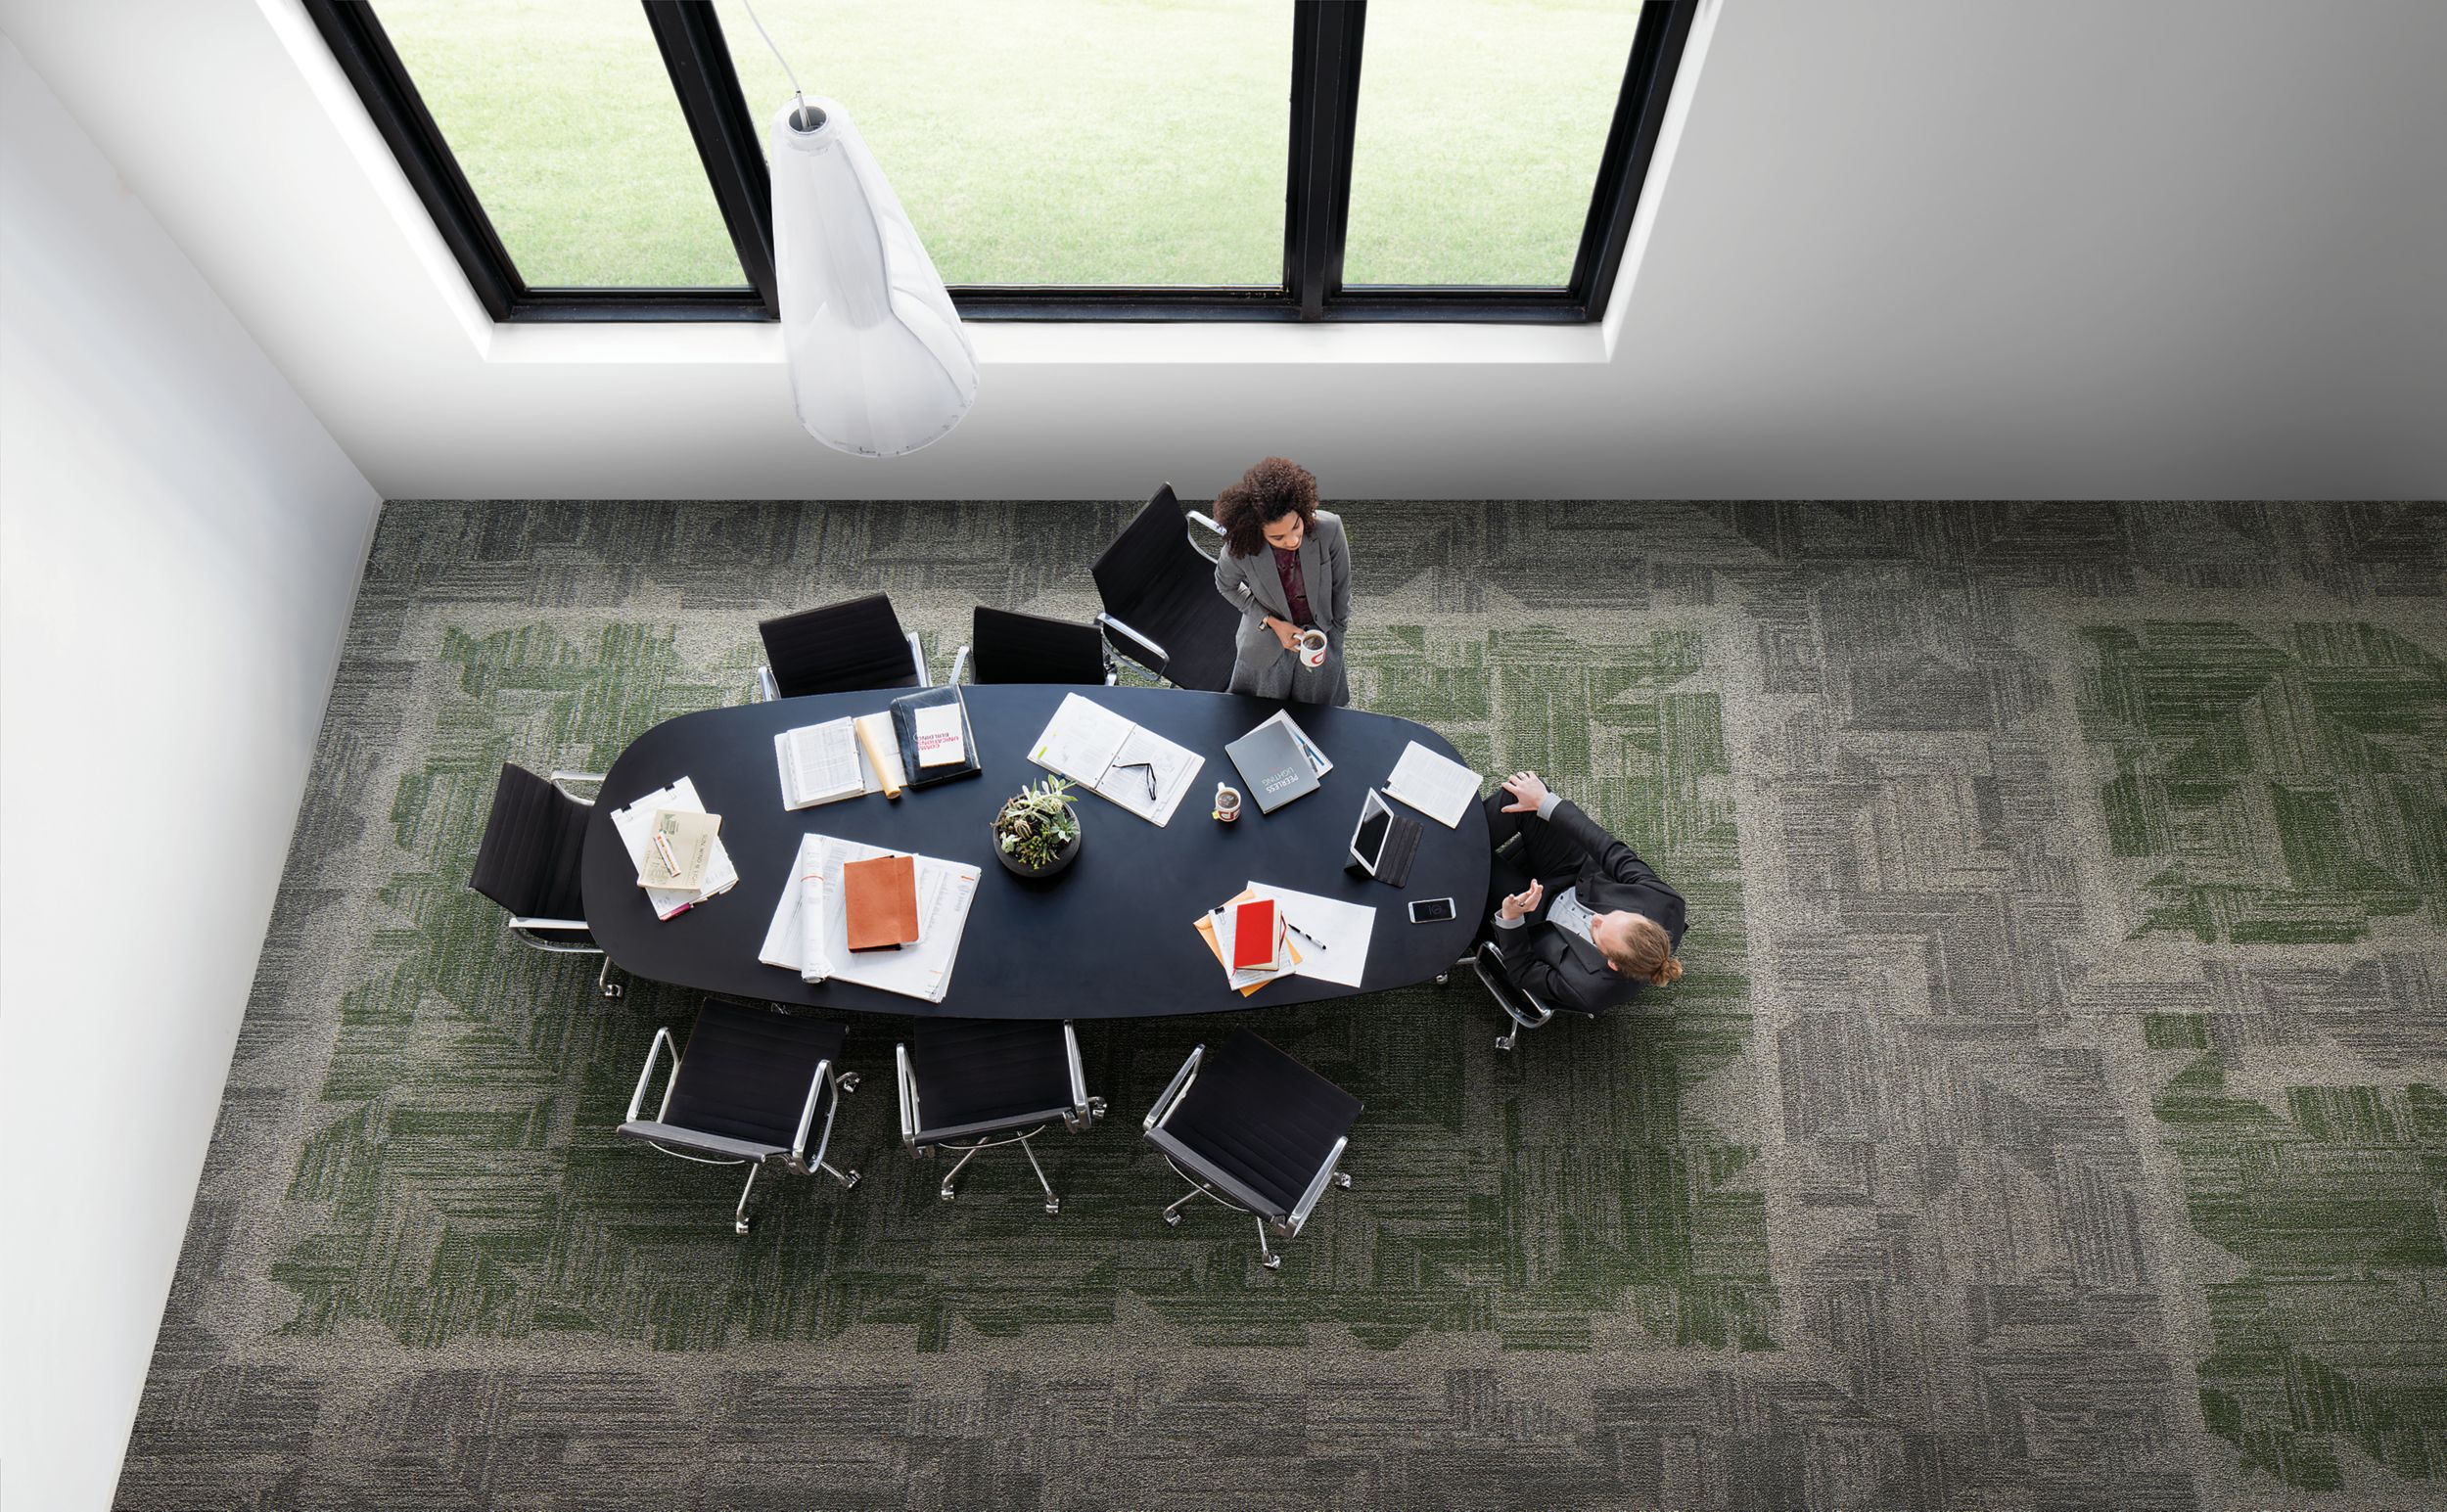 Interface Open Air 403 carpet tile in overhead view of meeting table with man and woman talking image number 1